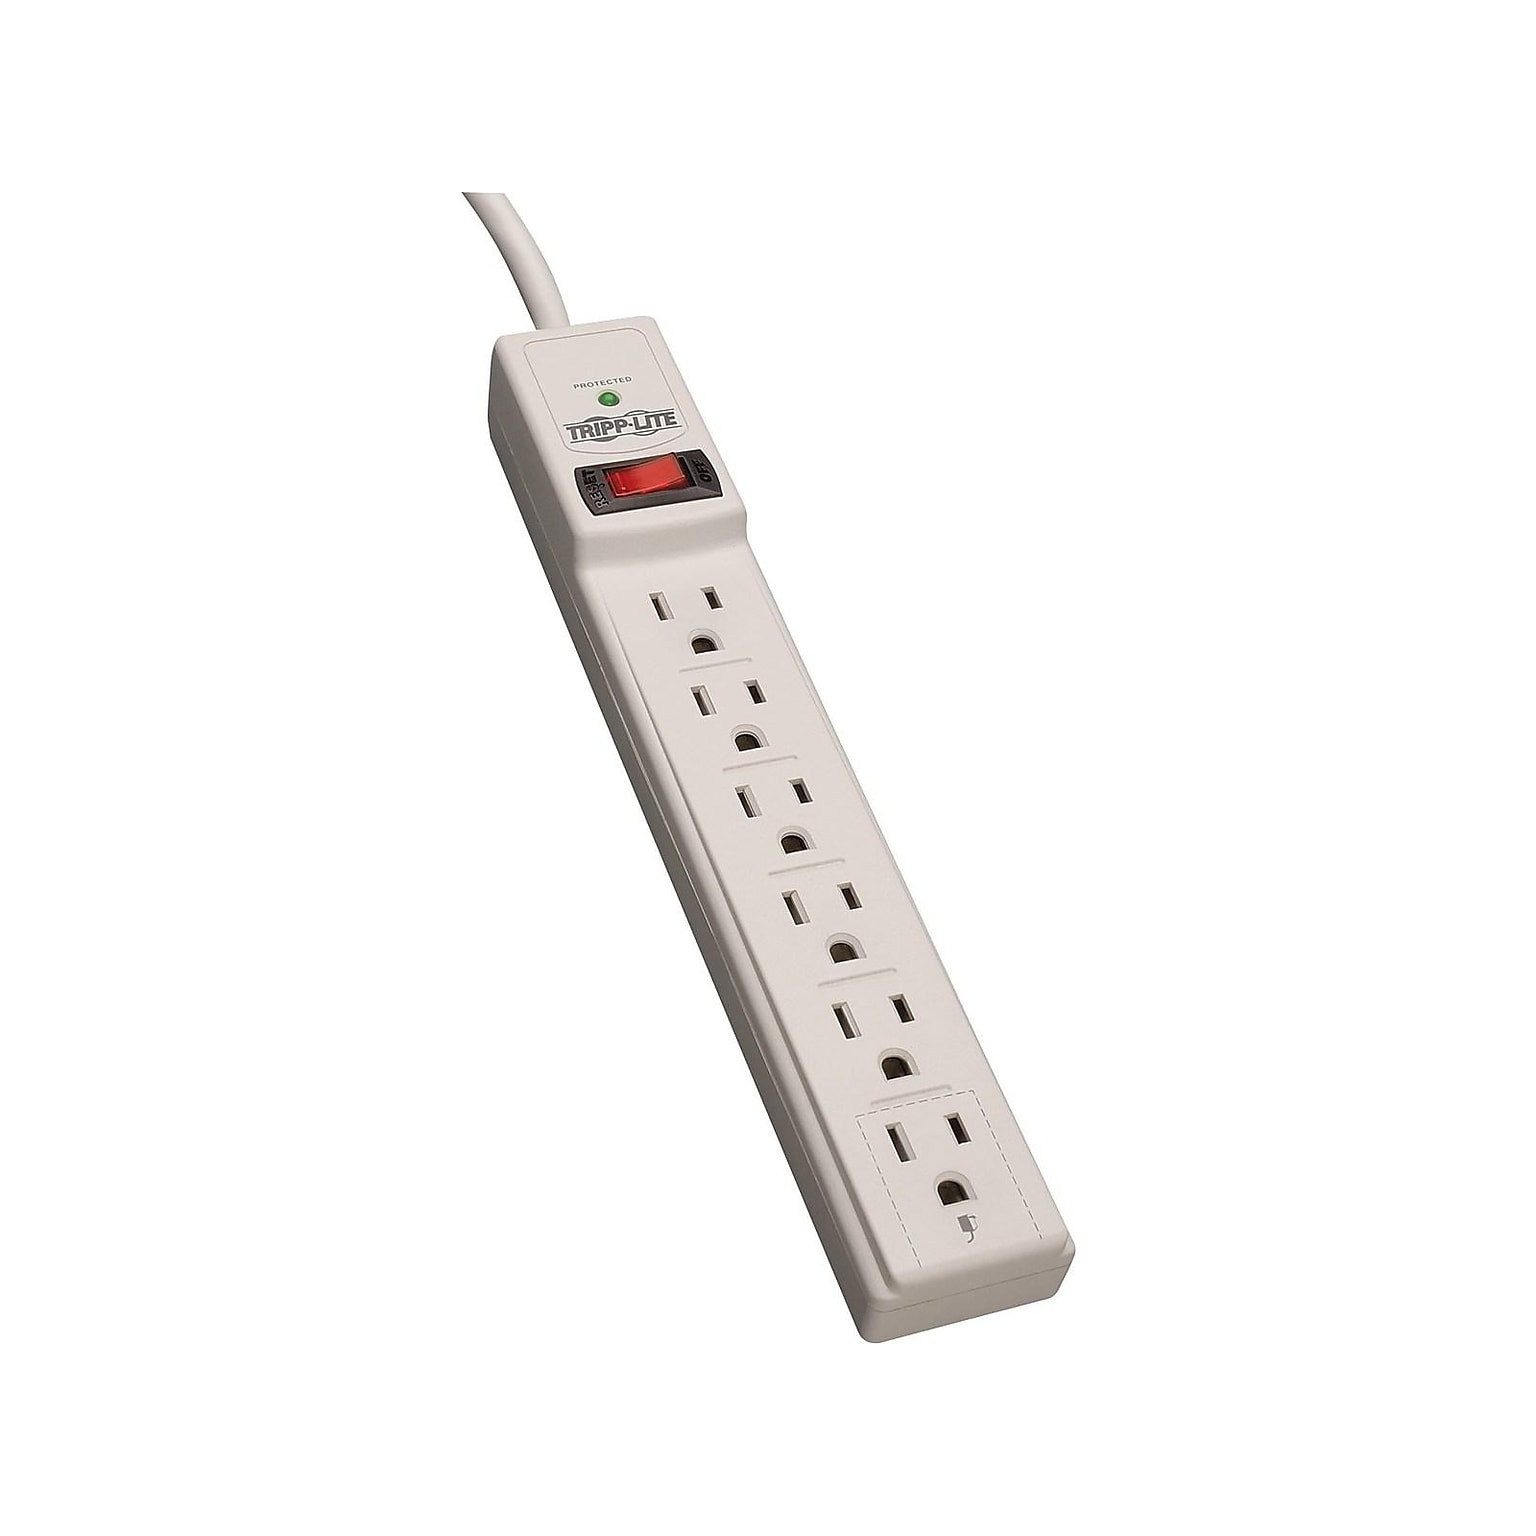 Tripp Lite Protect It! 6-Outlet Surge Protector, 6 Cord (TRPTLP606)